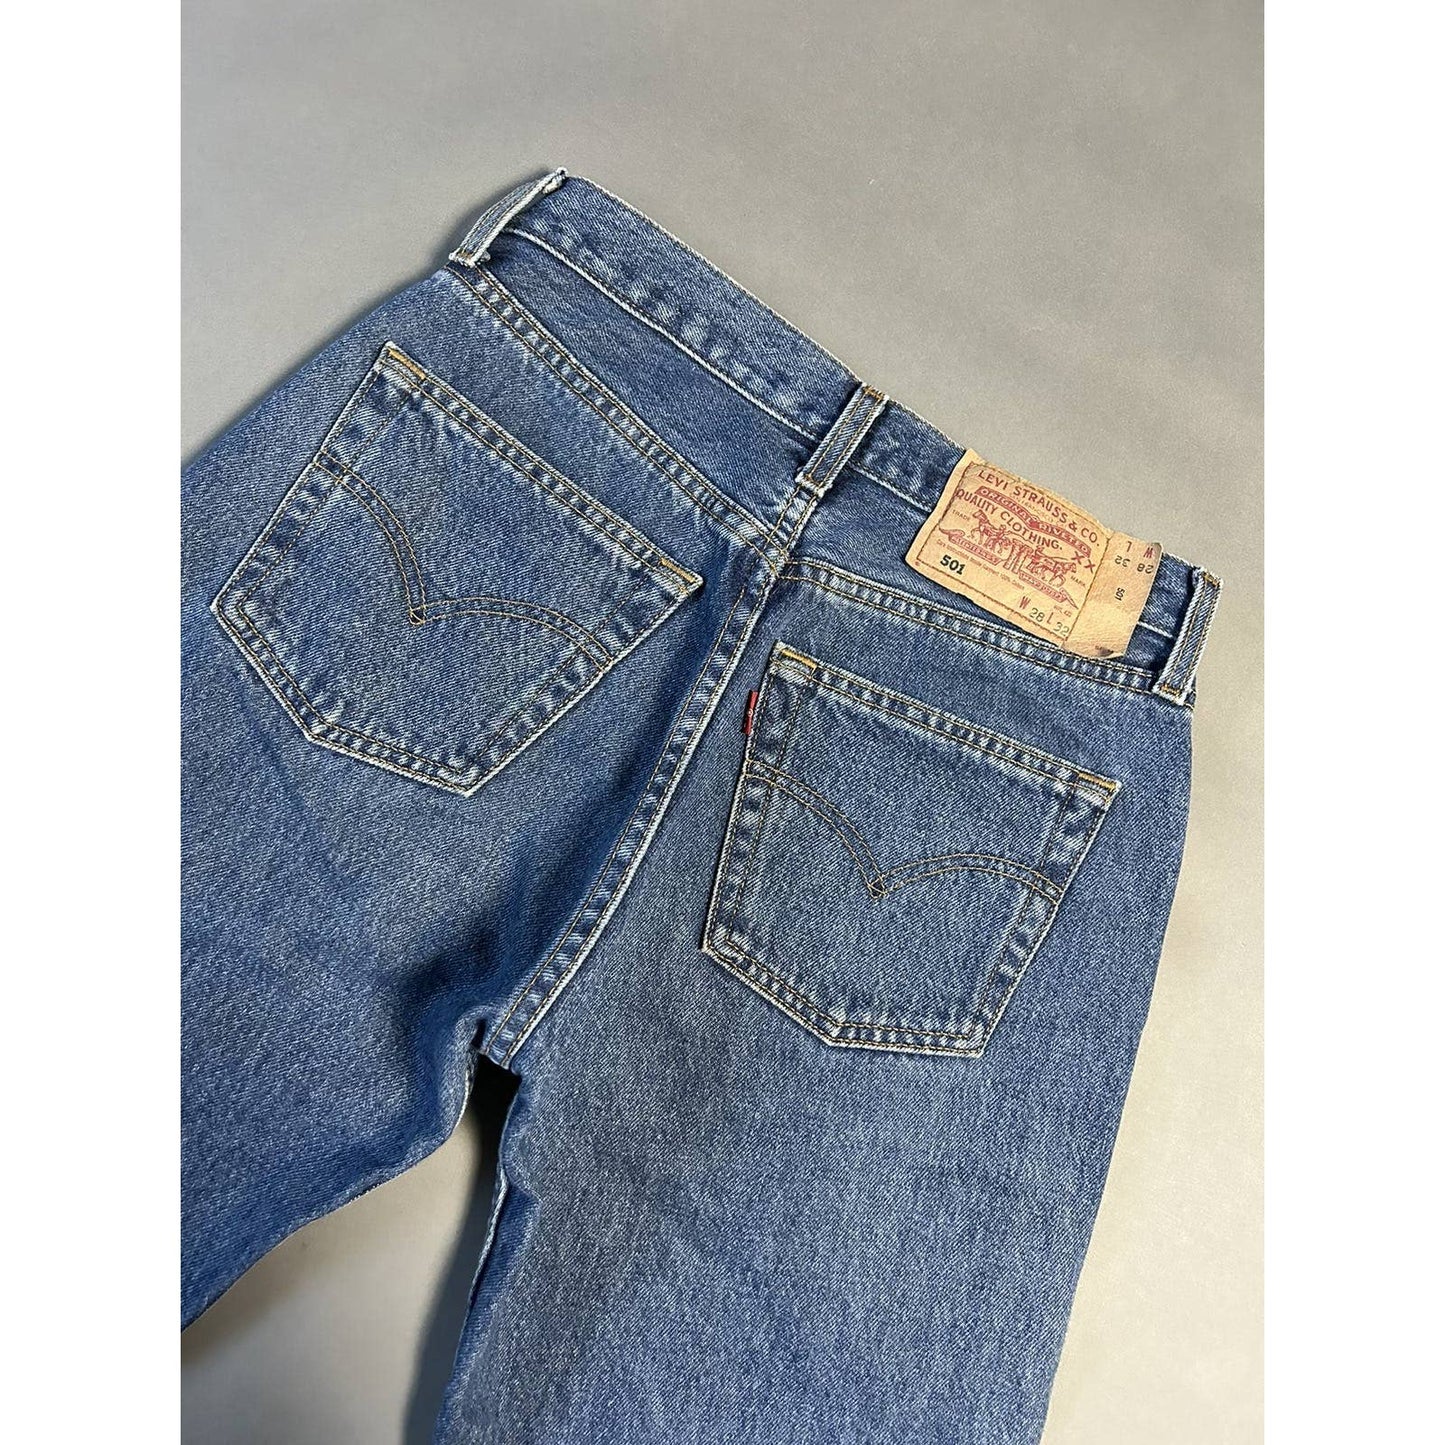 90s Levi’s 501 vintage navy jeans made in USA denim pants